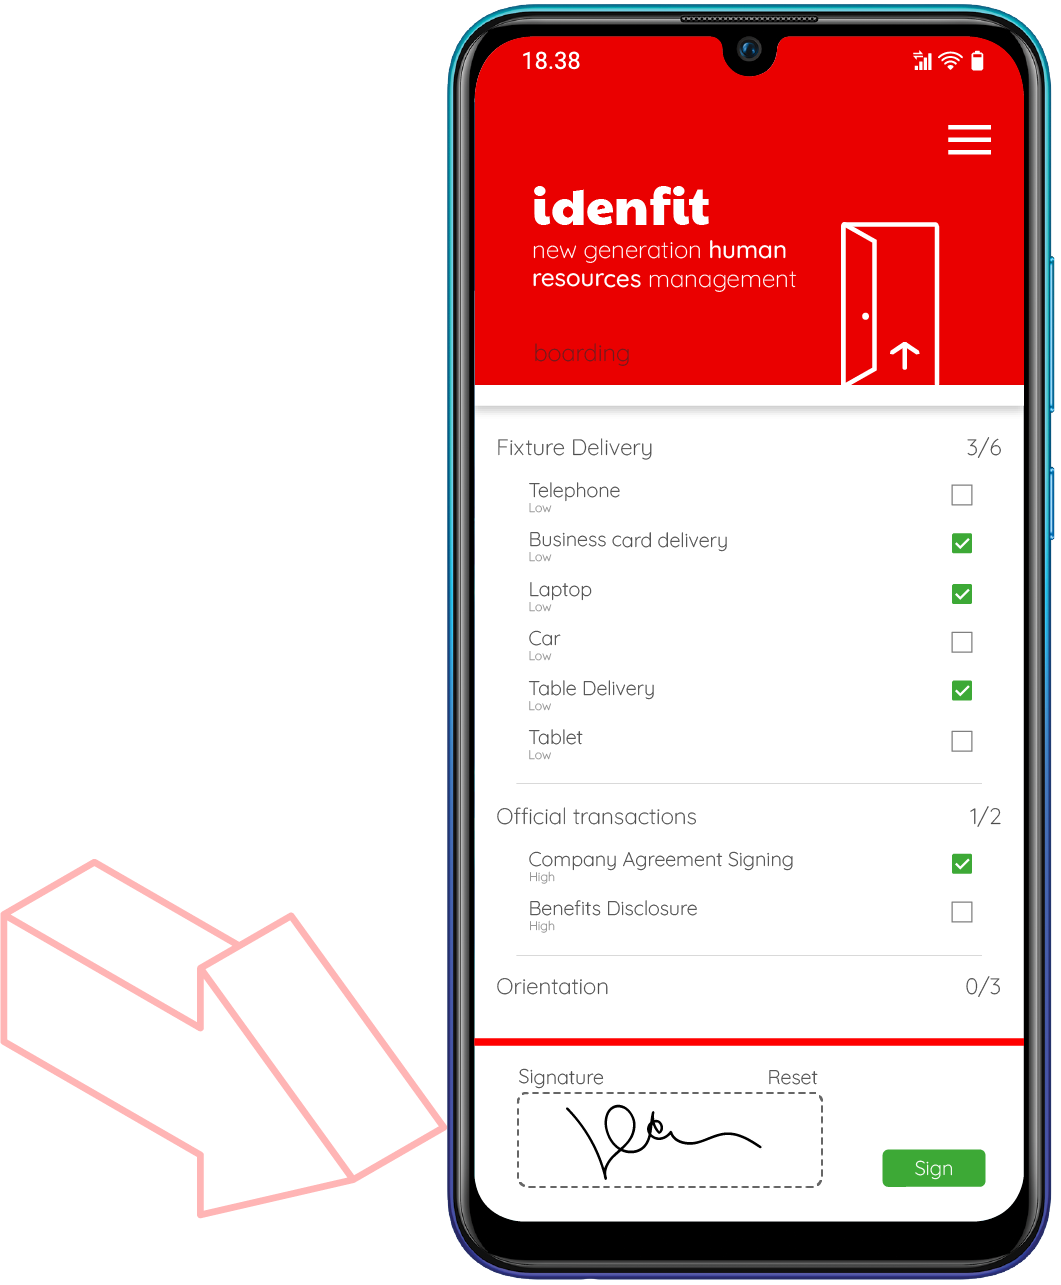 Idenfit human resources management software contains various features to simplify the onboarding processes.